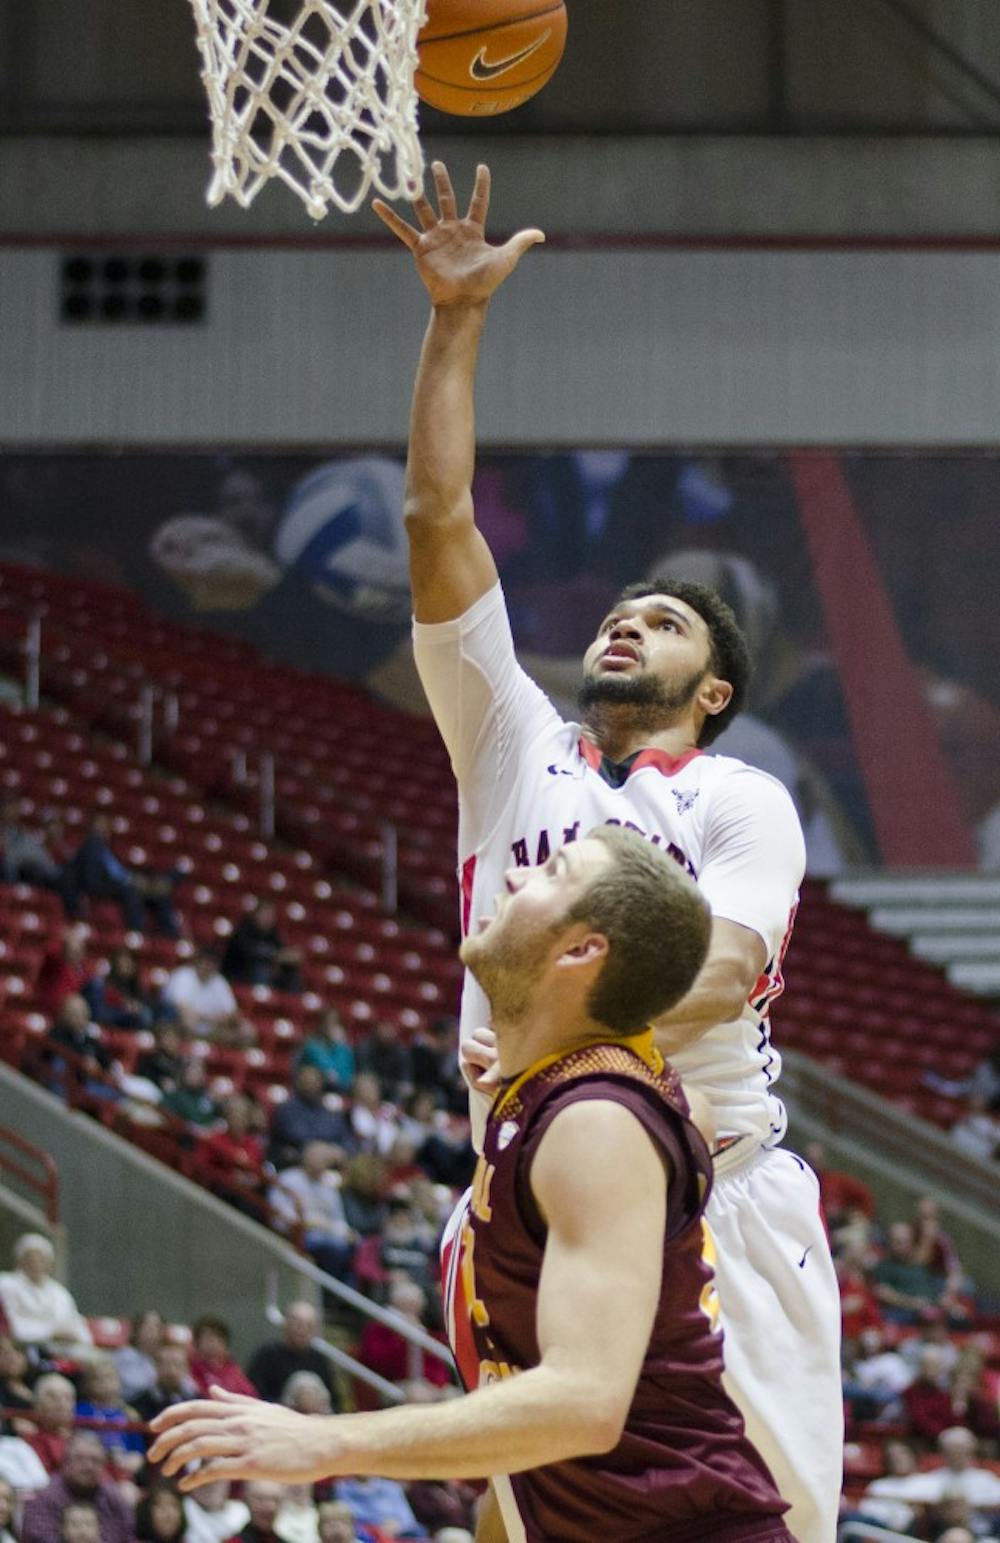 Sophomore forward Franko House goes up for a shot during the game against Central Michigan on Jan. 10 at Worthen Arena. DN PHOTO BREANNA DAUGHERTY